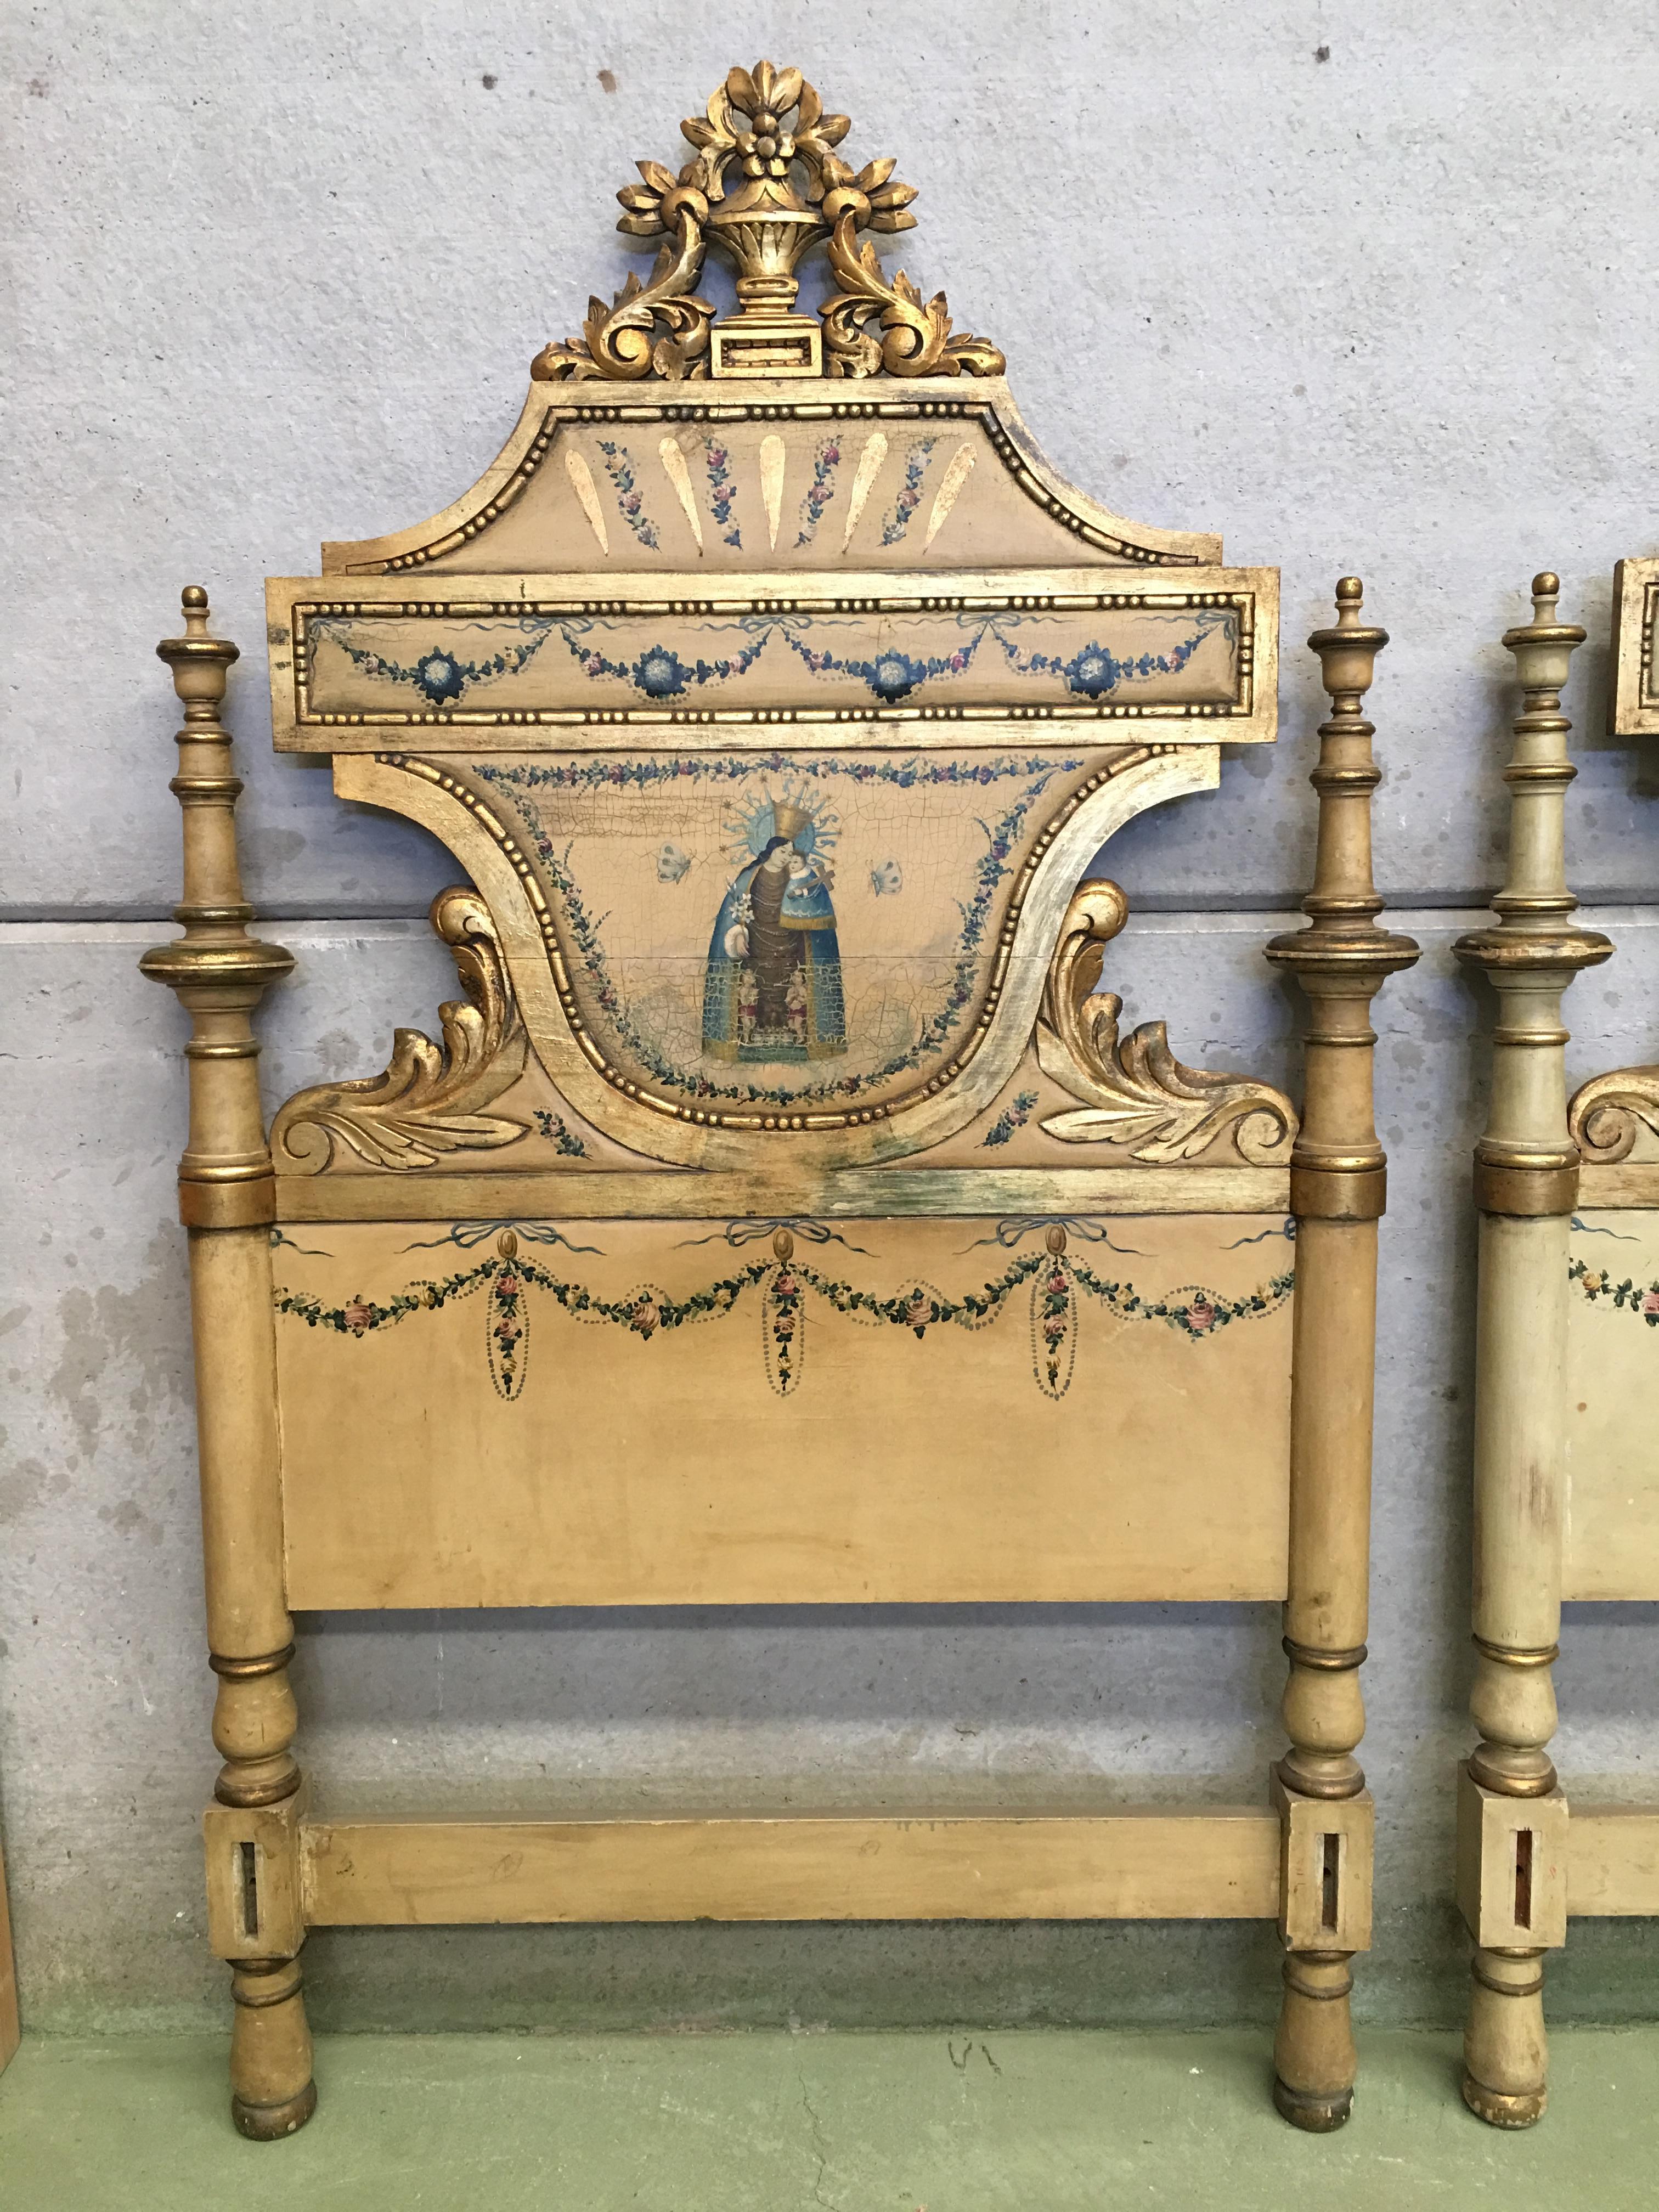 Early 19th century pair of Venetian polychromed headboards featured Madonna & Child.